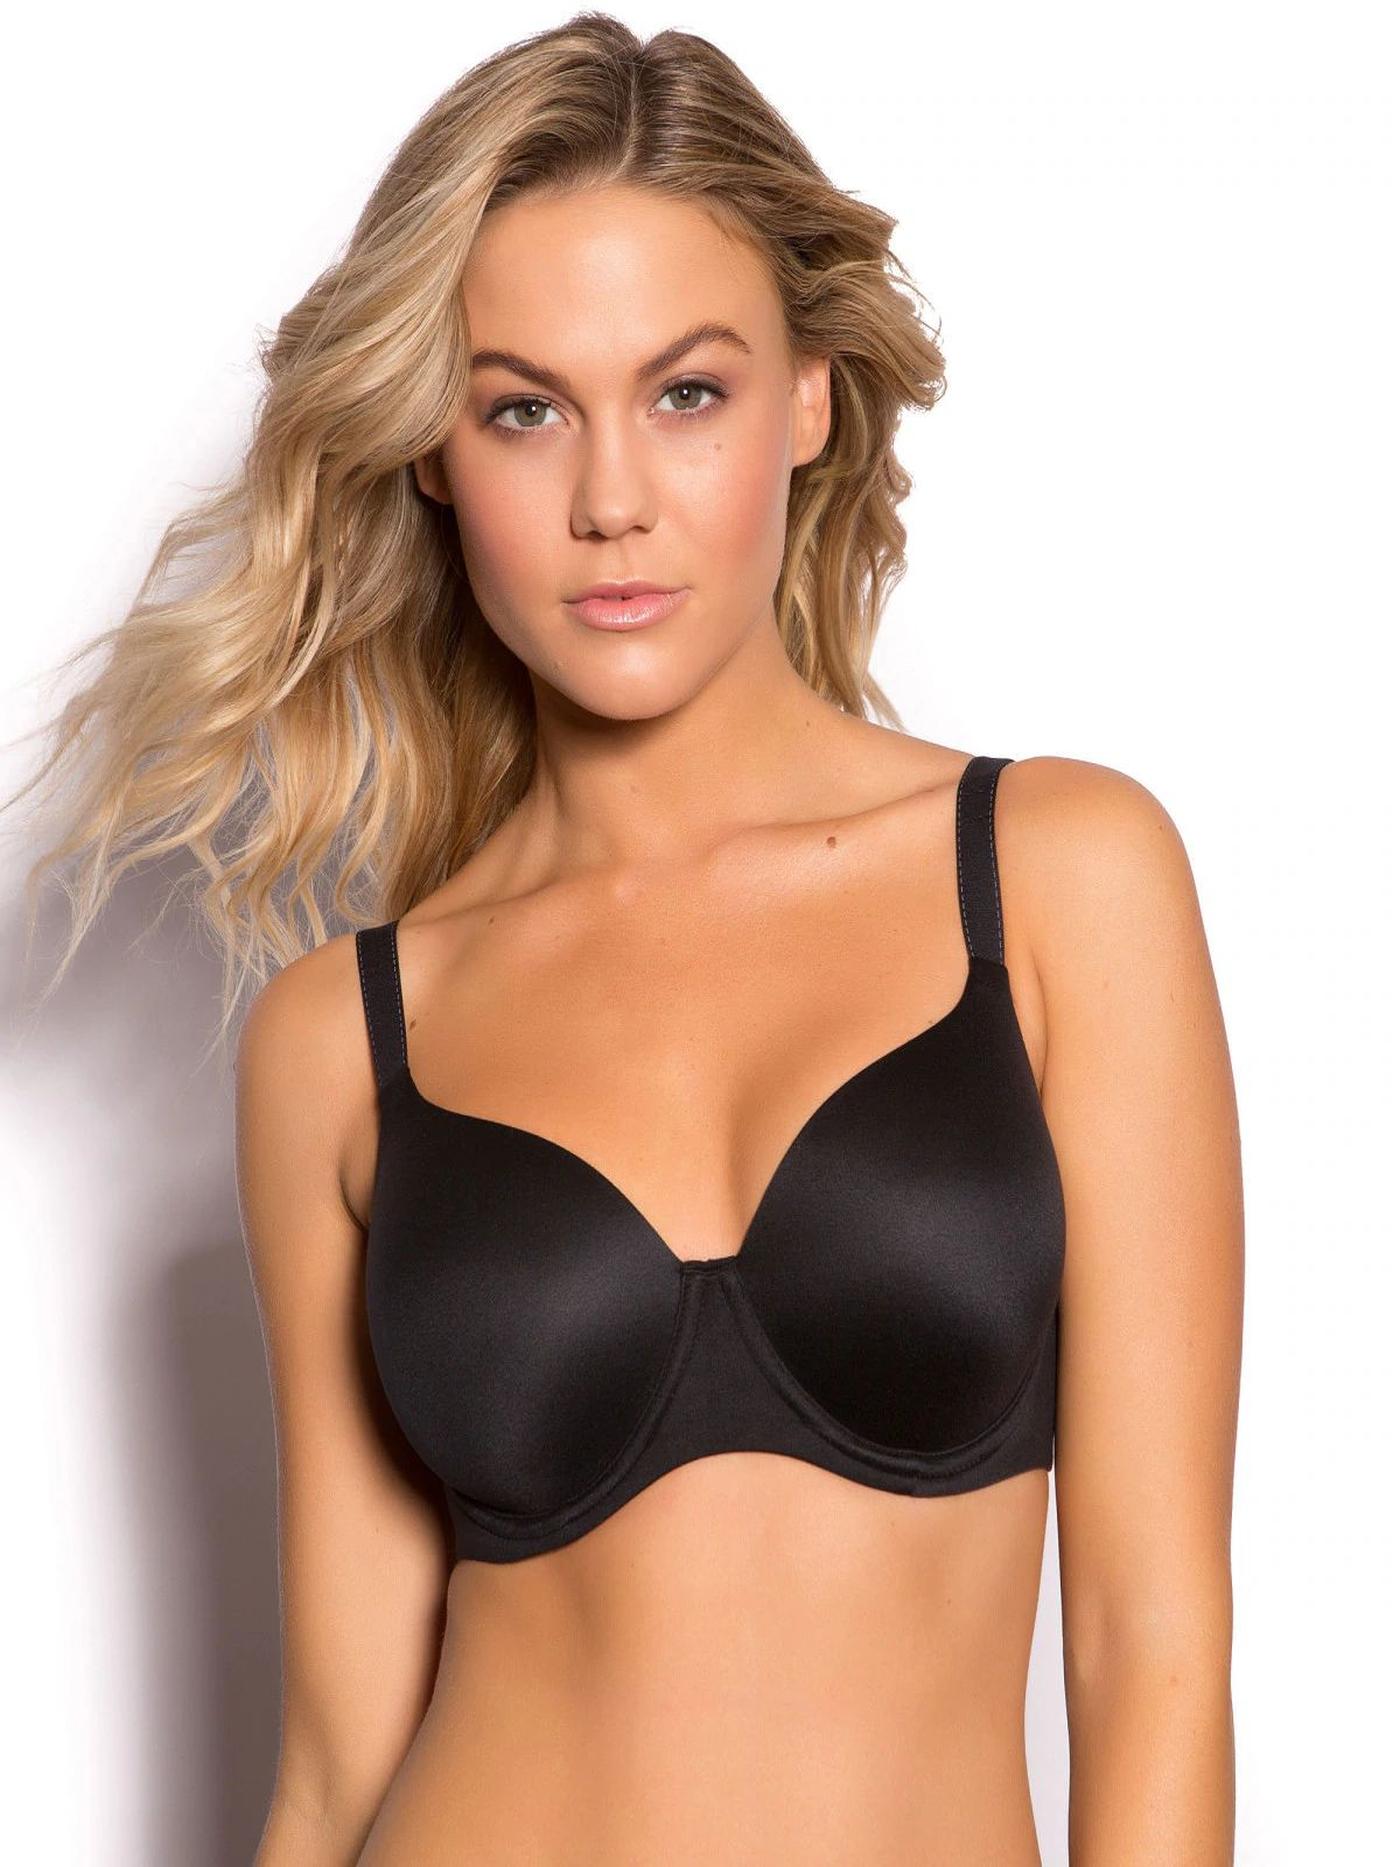 NWT Full Figure T-Shirt Bra-Underwire-Full Coverage-Size Choice Sold @Macys